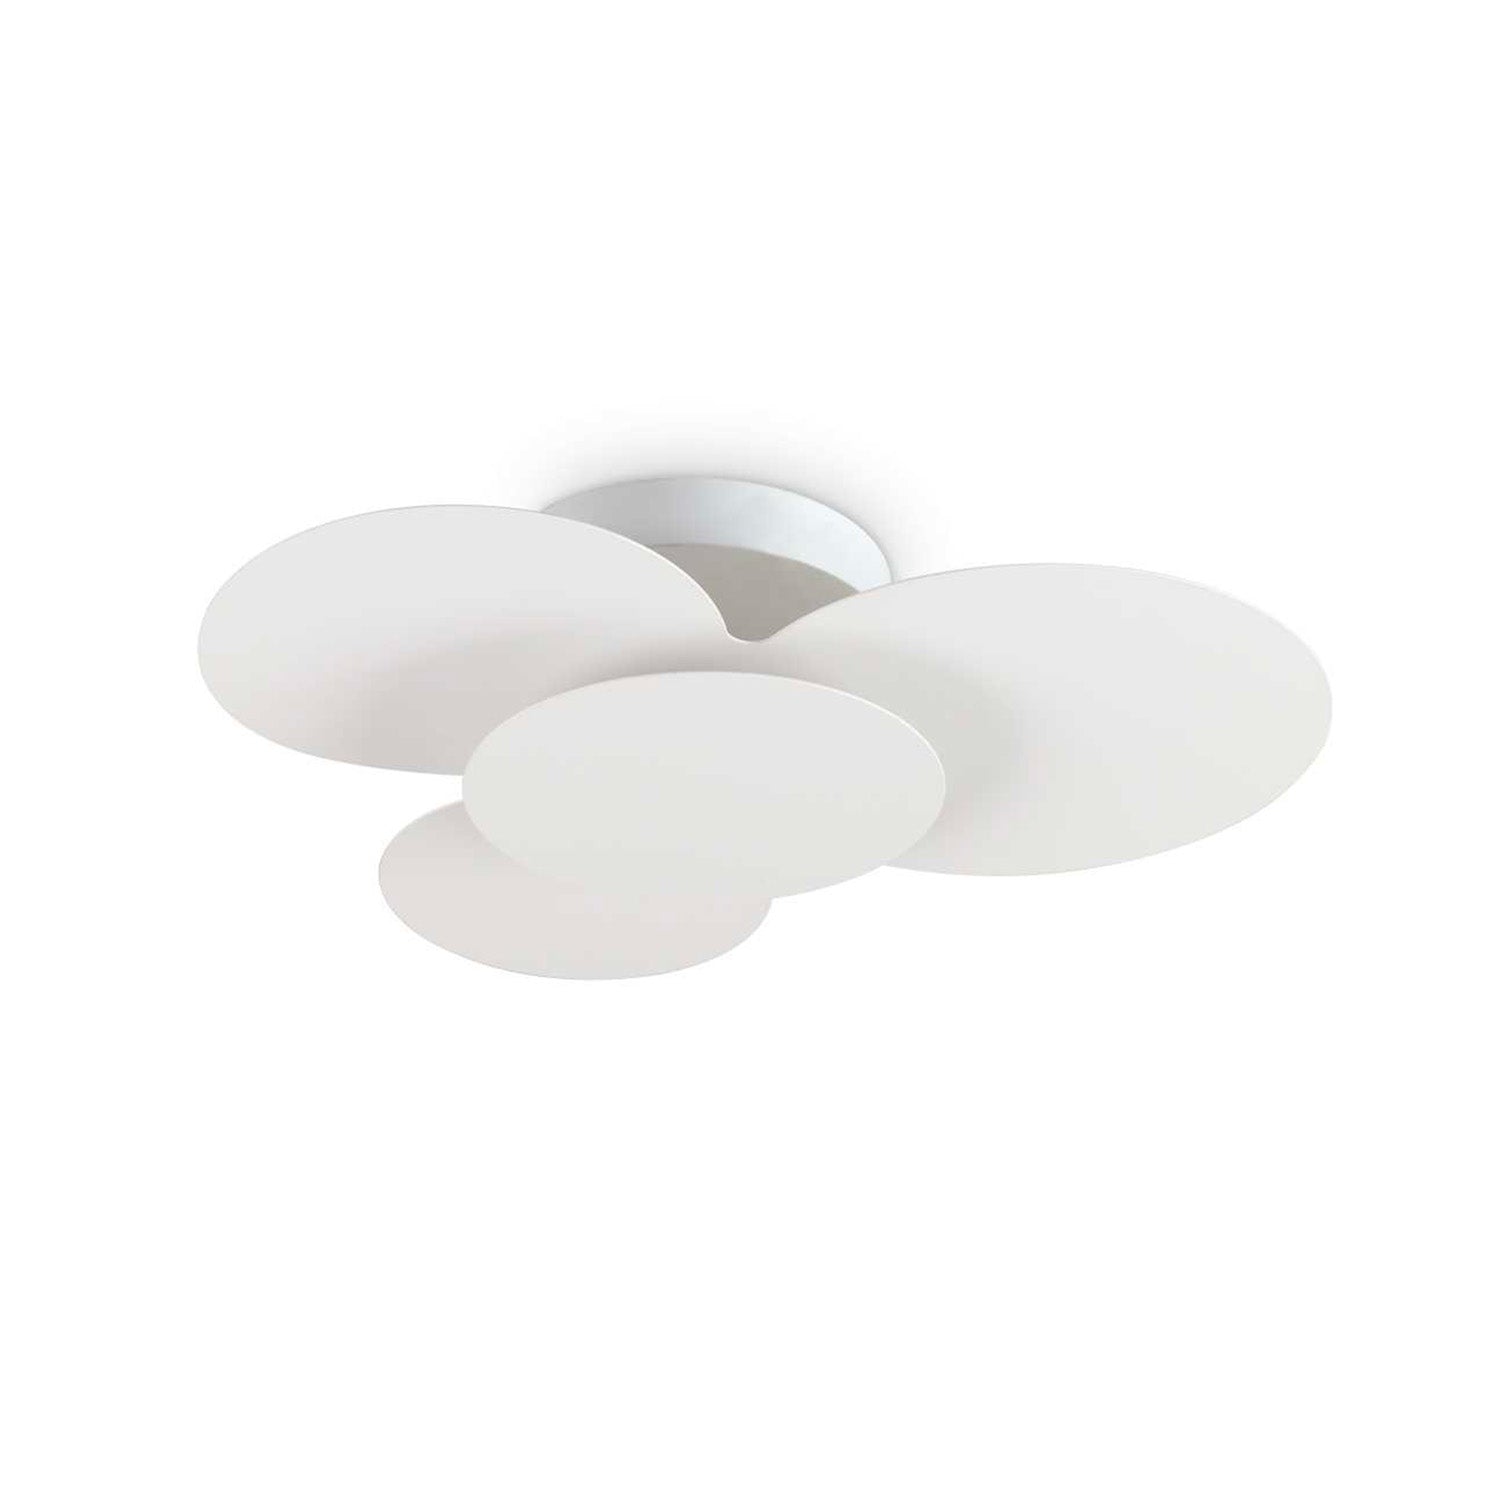 CLOUD - Cloud ceiling light with integrated LED